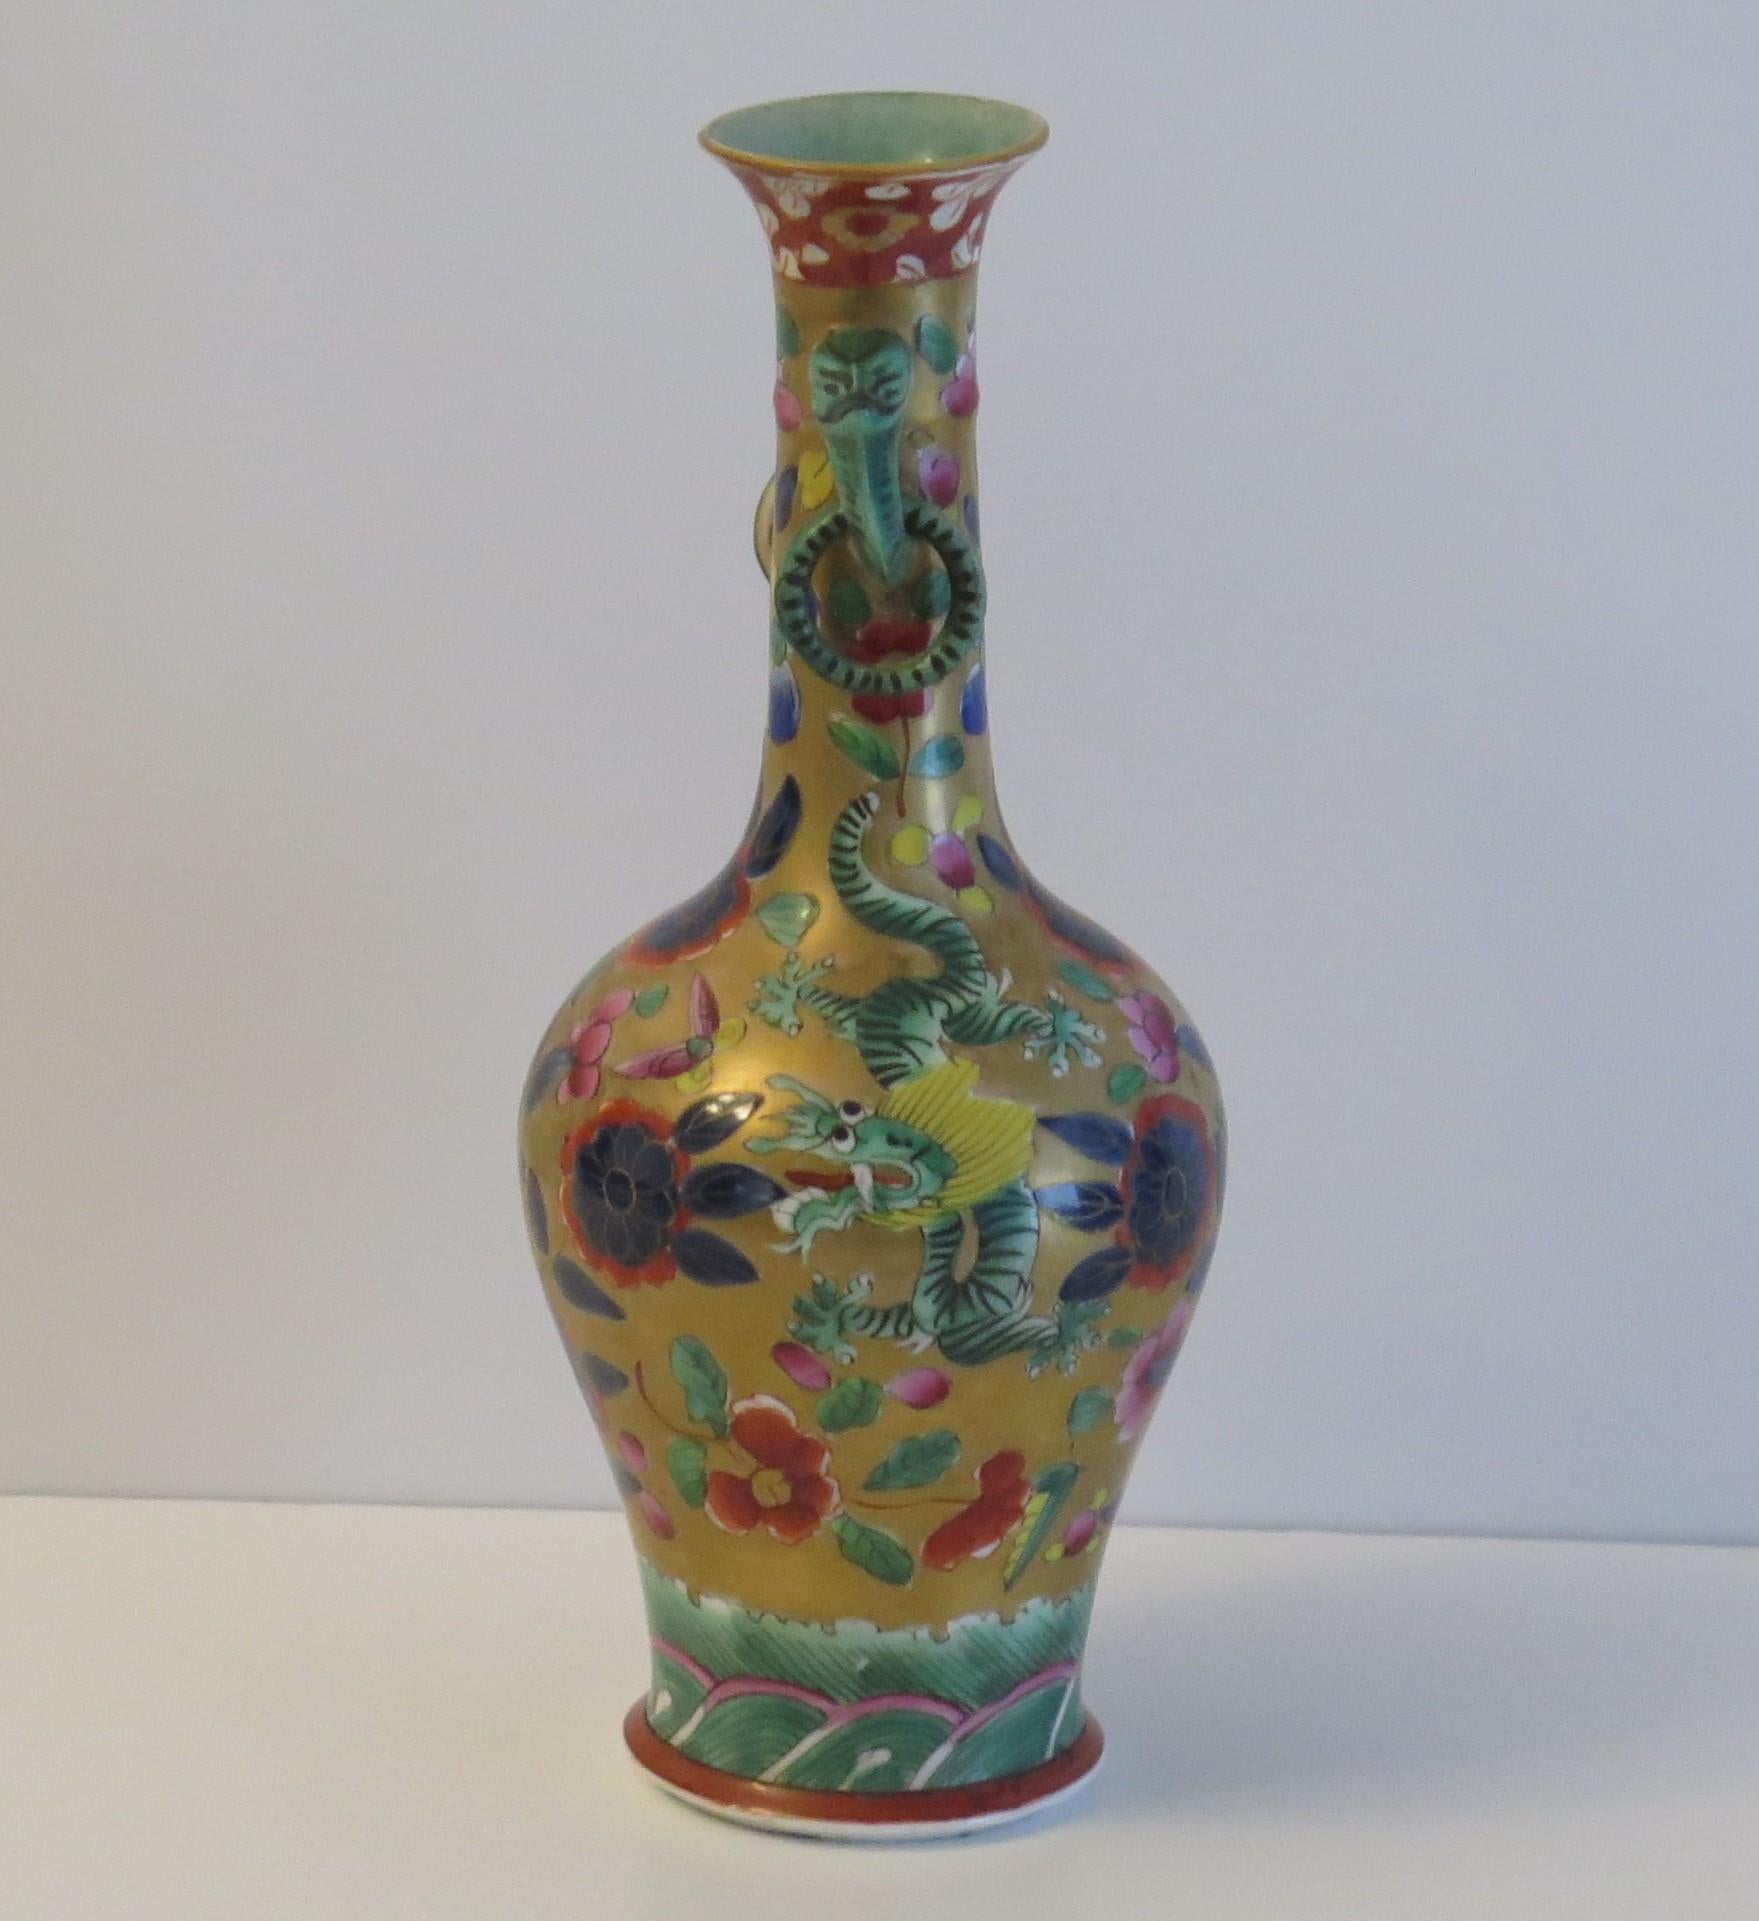 Very Rare Mason's Ironstone Bottle Vase in Chinese Dragon Pattern, circa 1820 For Sale 2